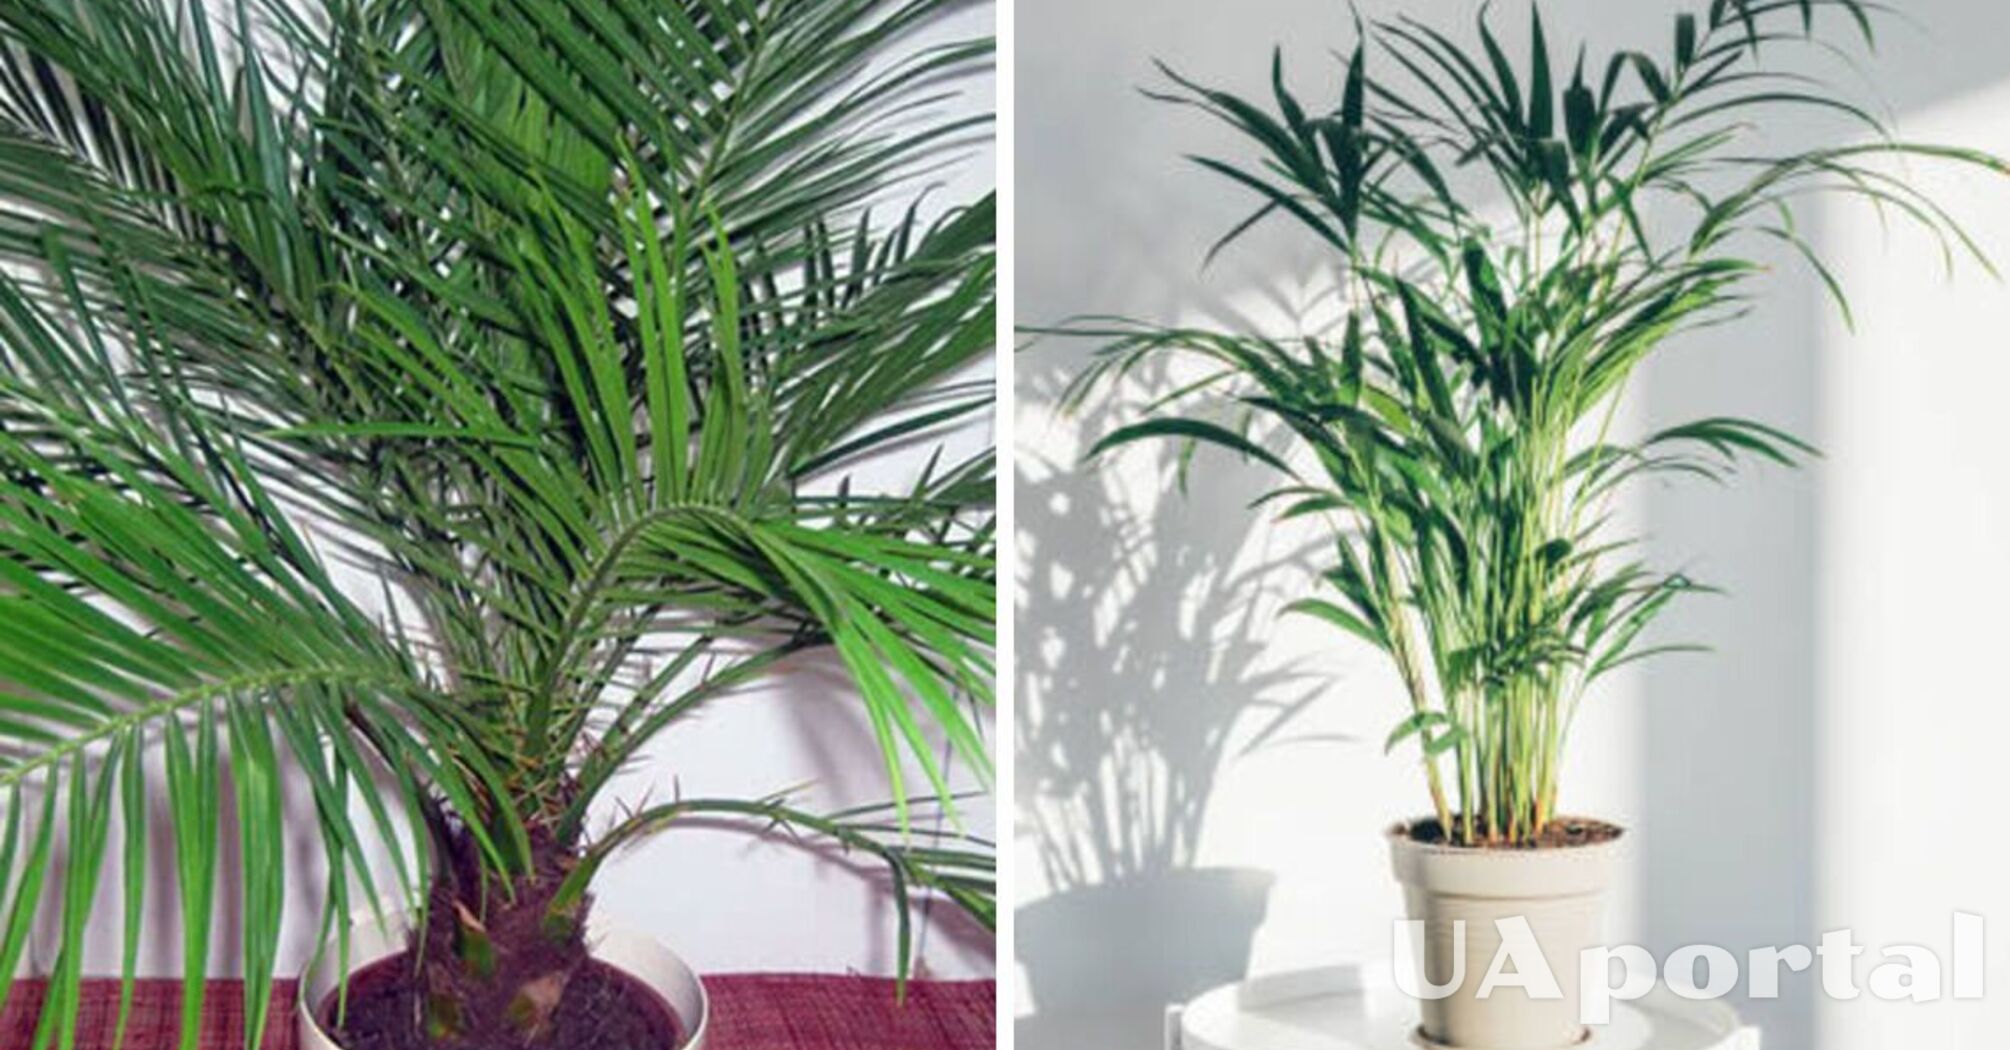 How to properly care for a drying indoor palm